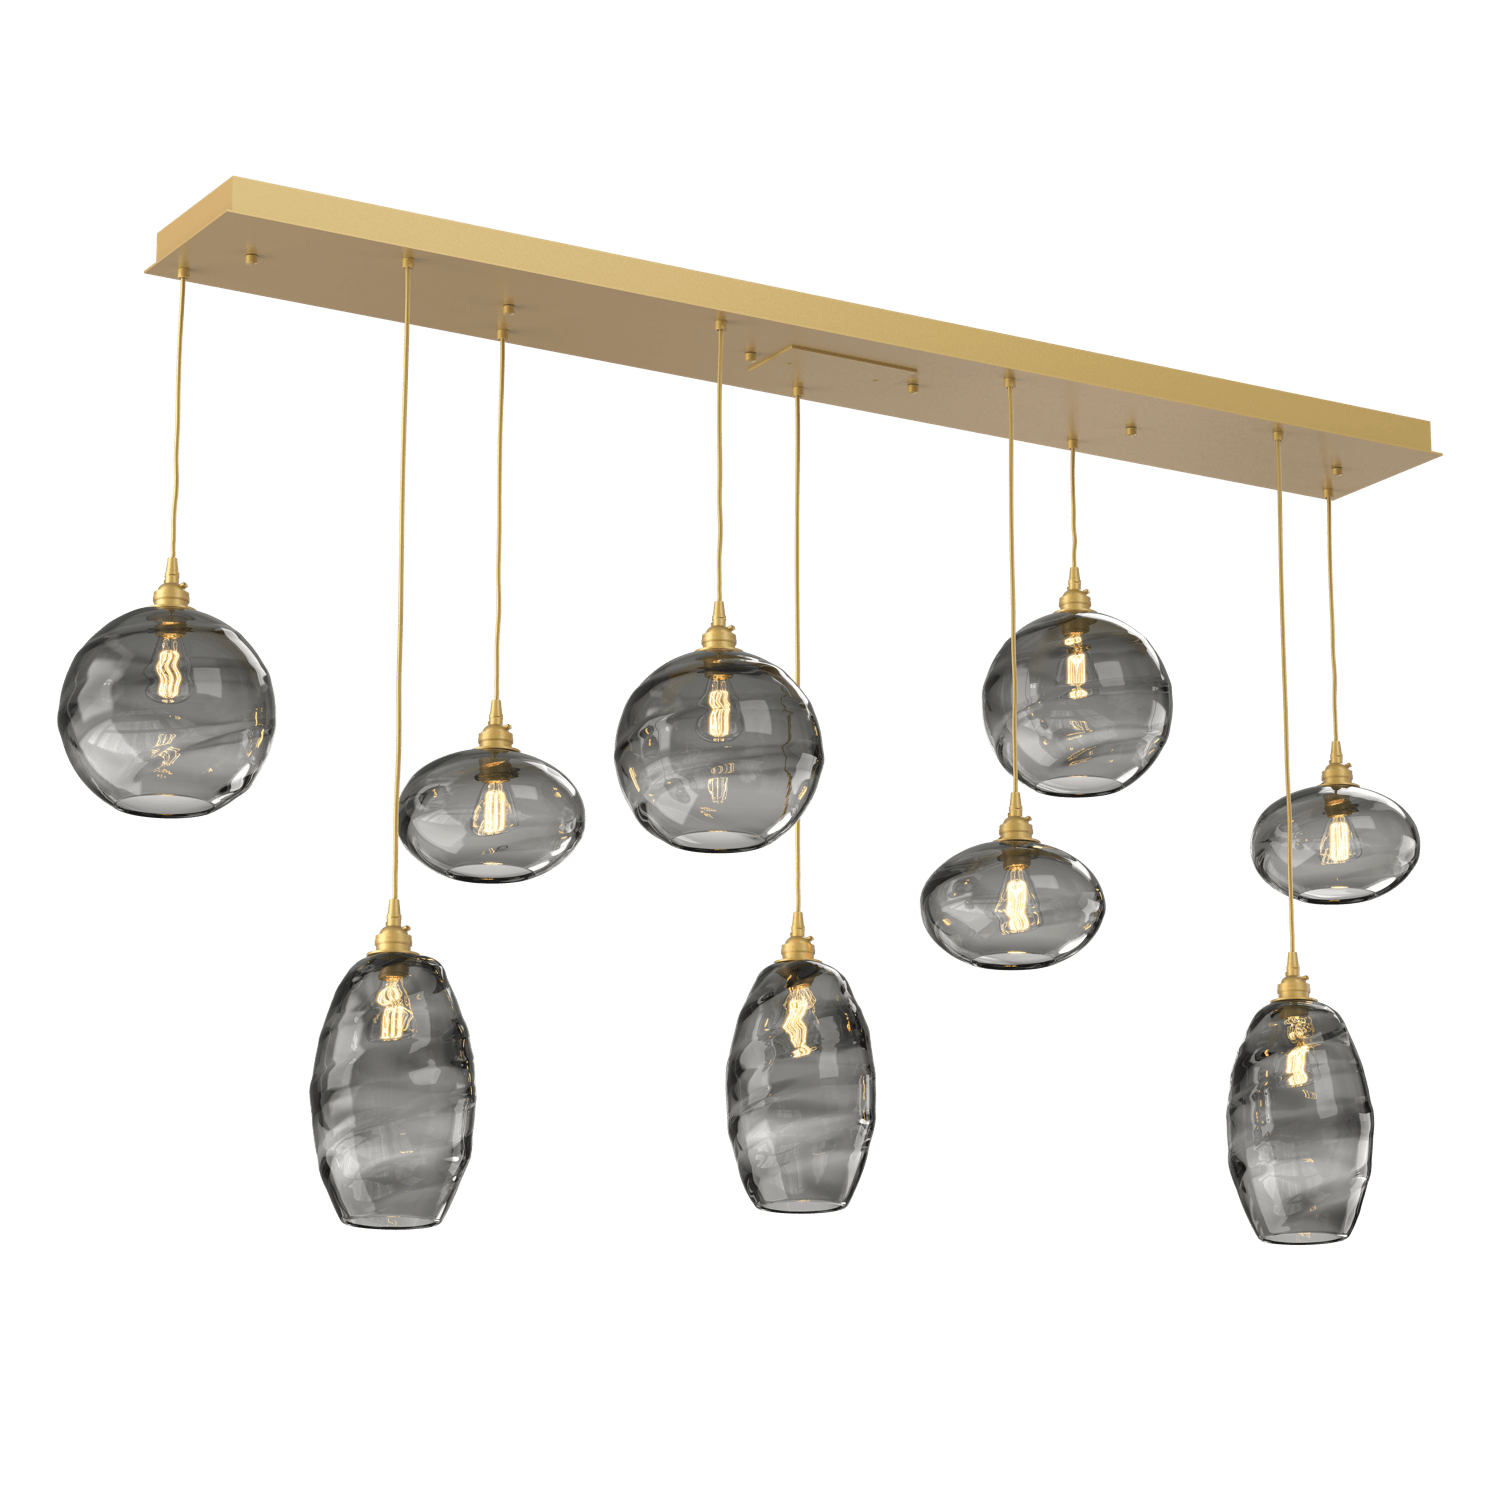 PLB0048-09-GB-OS-Hammerton-Studio-Optic-Blown-Glass-Misto-9-light-linear-pendant-chandelier-with-gilded-brass-finish-and-optic-smoke-blown-glass-shades-and-incandescent-lamping